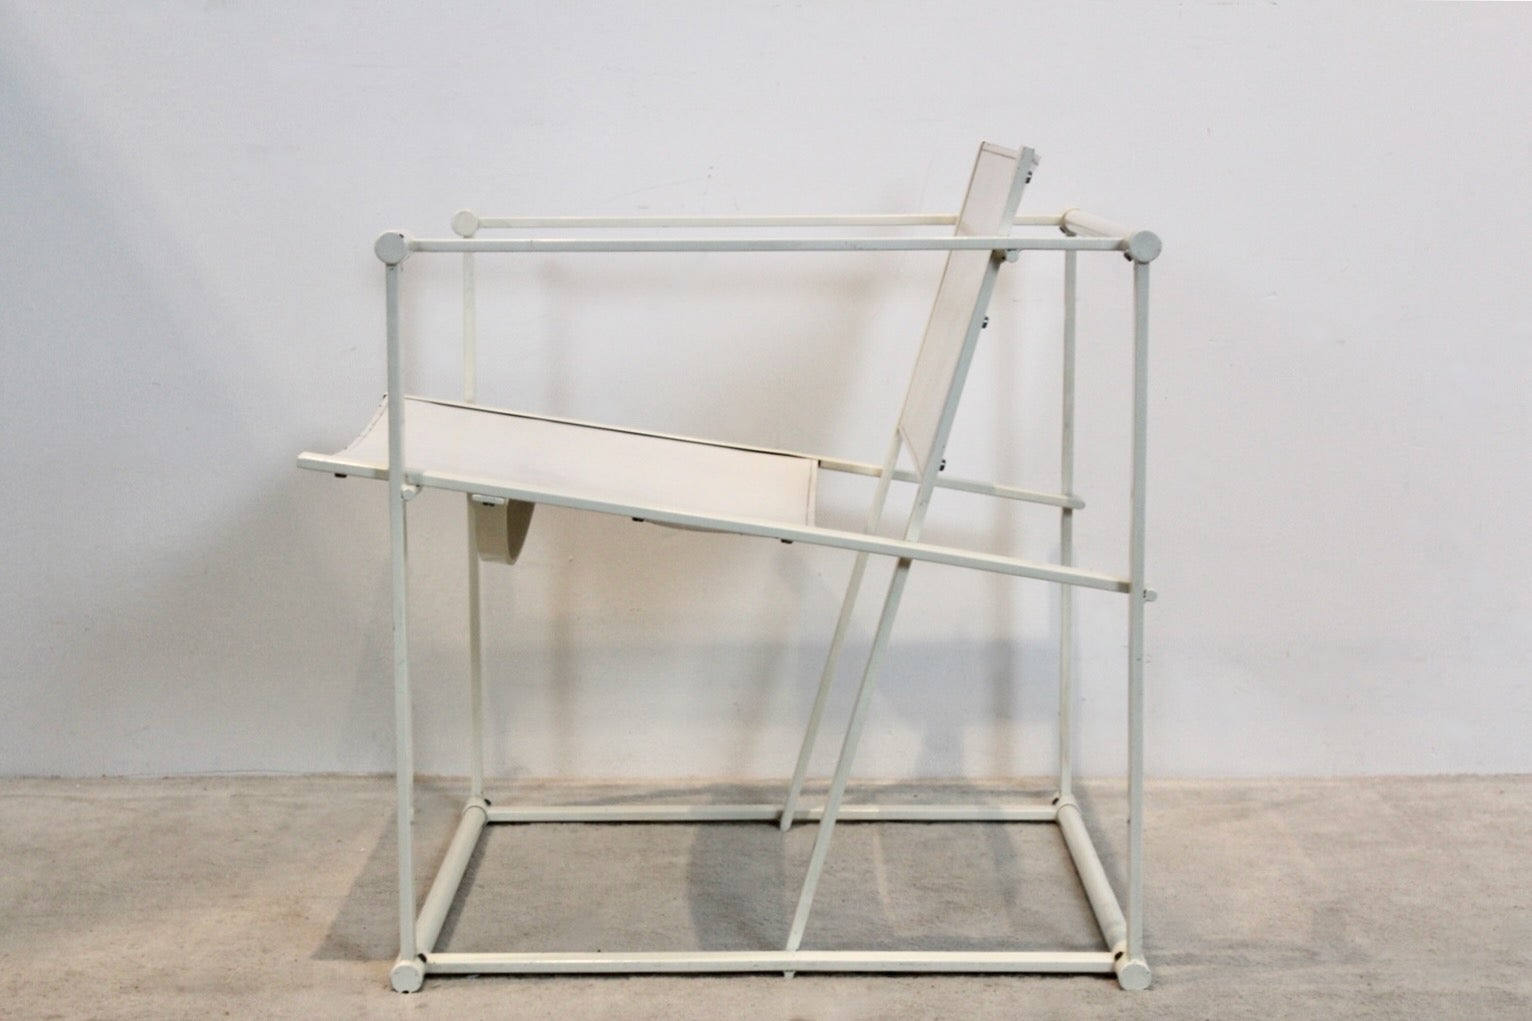 FM62 Cubic chair designed by Radboud van Beekum for Pastoe the Netherlands in the 1980s. Lacquered square metal frame with the back and seat in strong white Saddle Leather with beautiful patina! Truly a unique piece with beautiful graphic design.